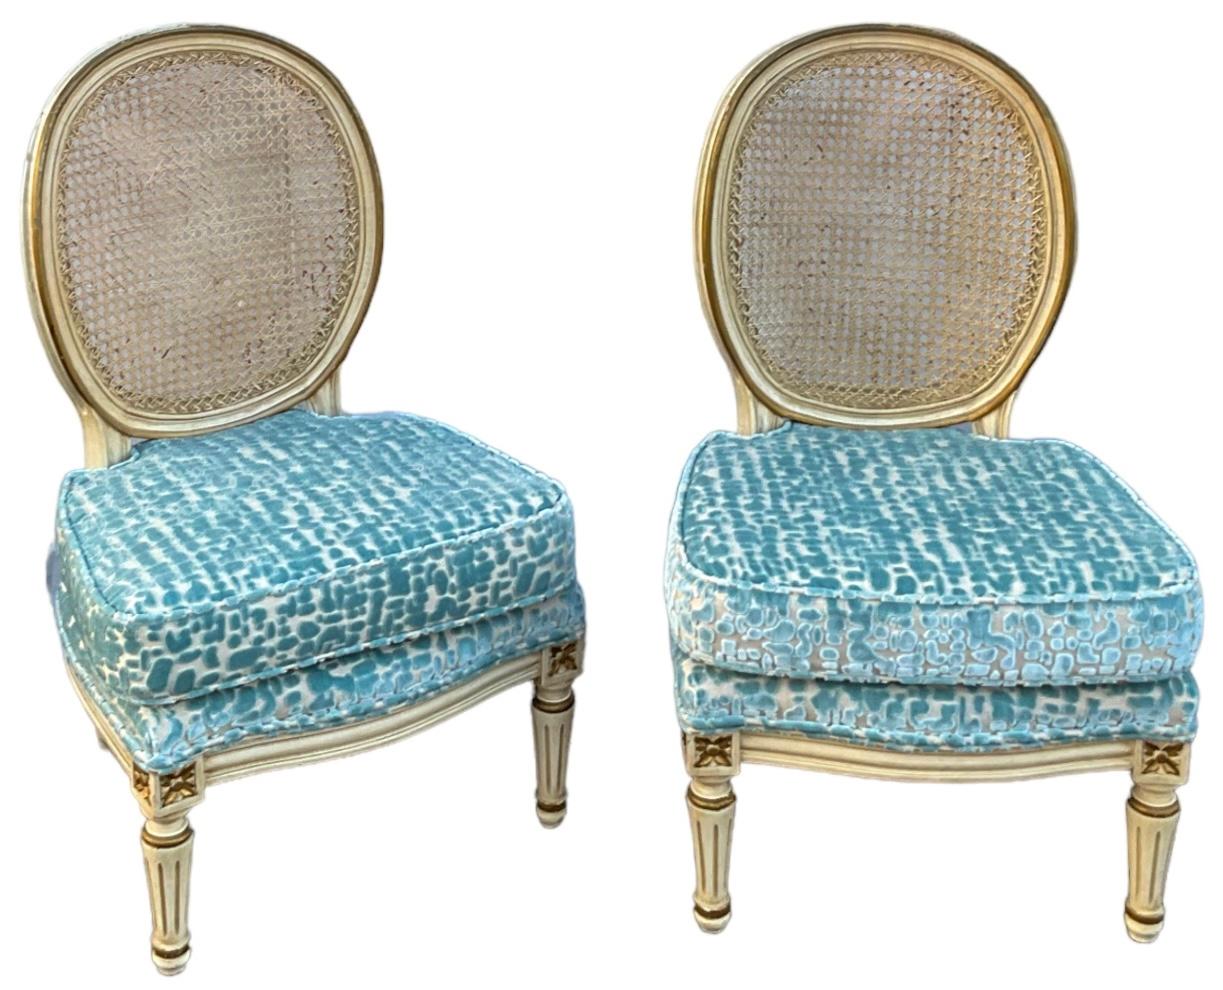 Upholstery Hollywood Regency Era French Style Painted Slipper Chairs In Cut Velvet -Pair For Sale